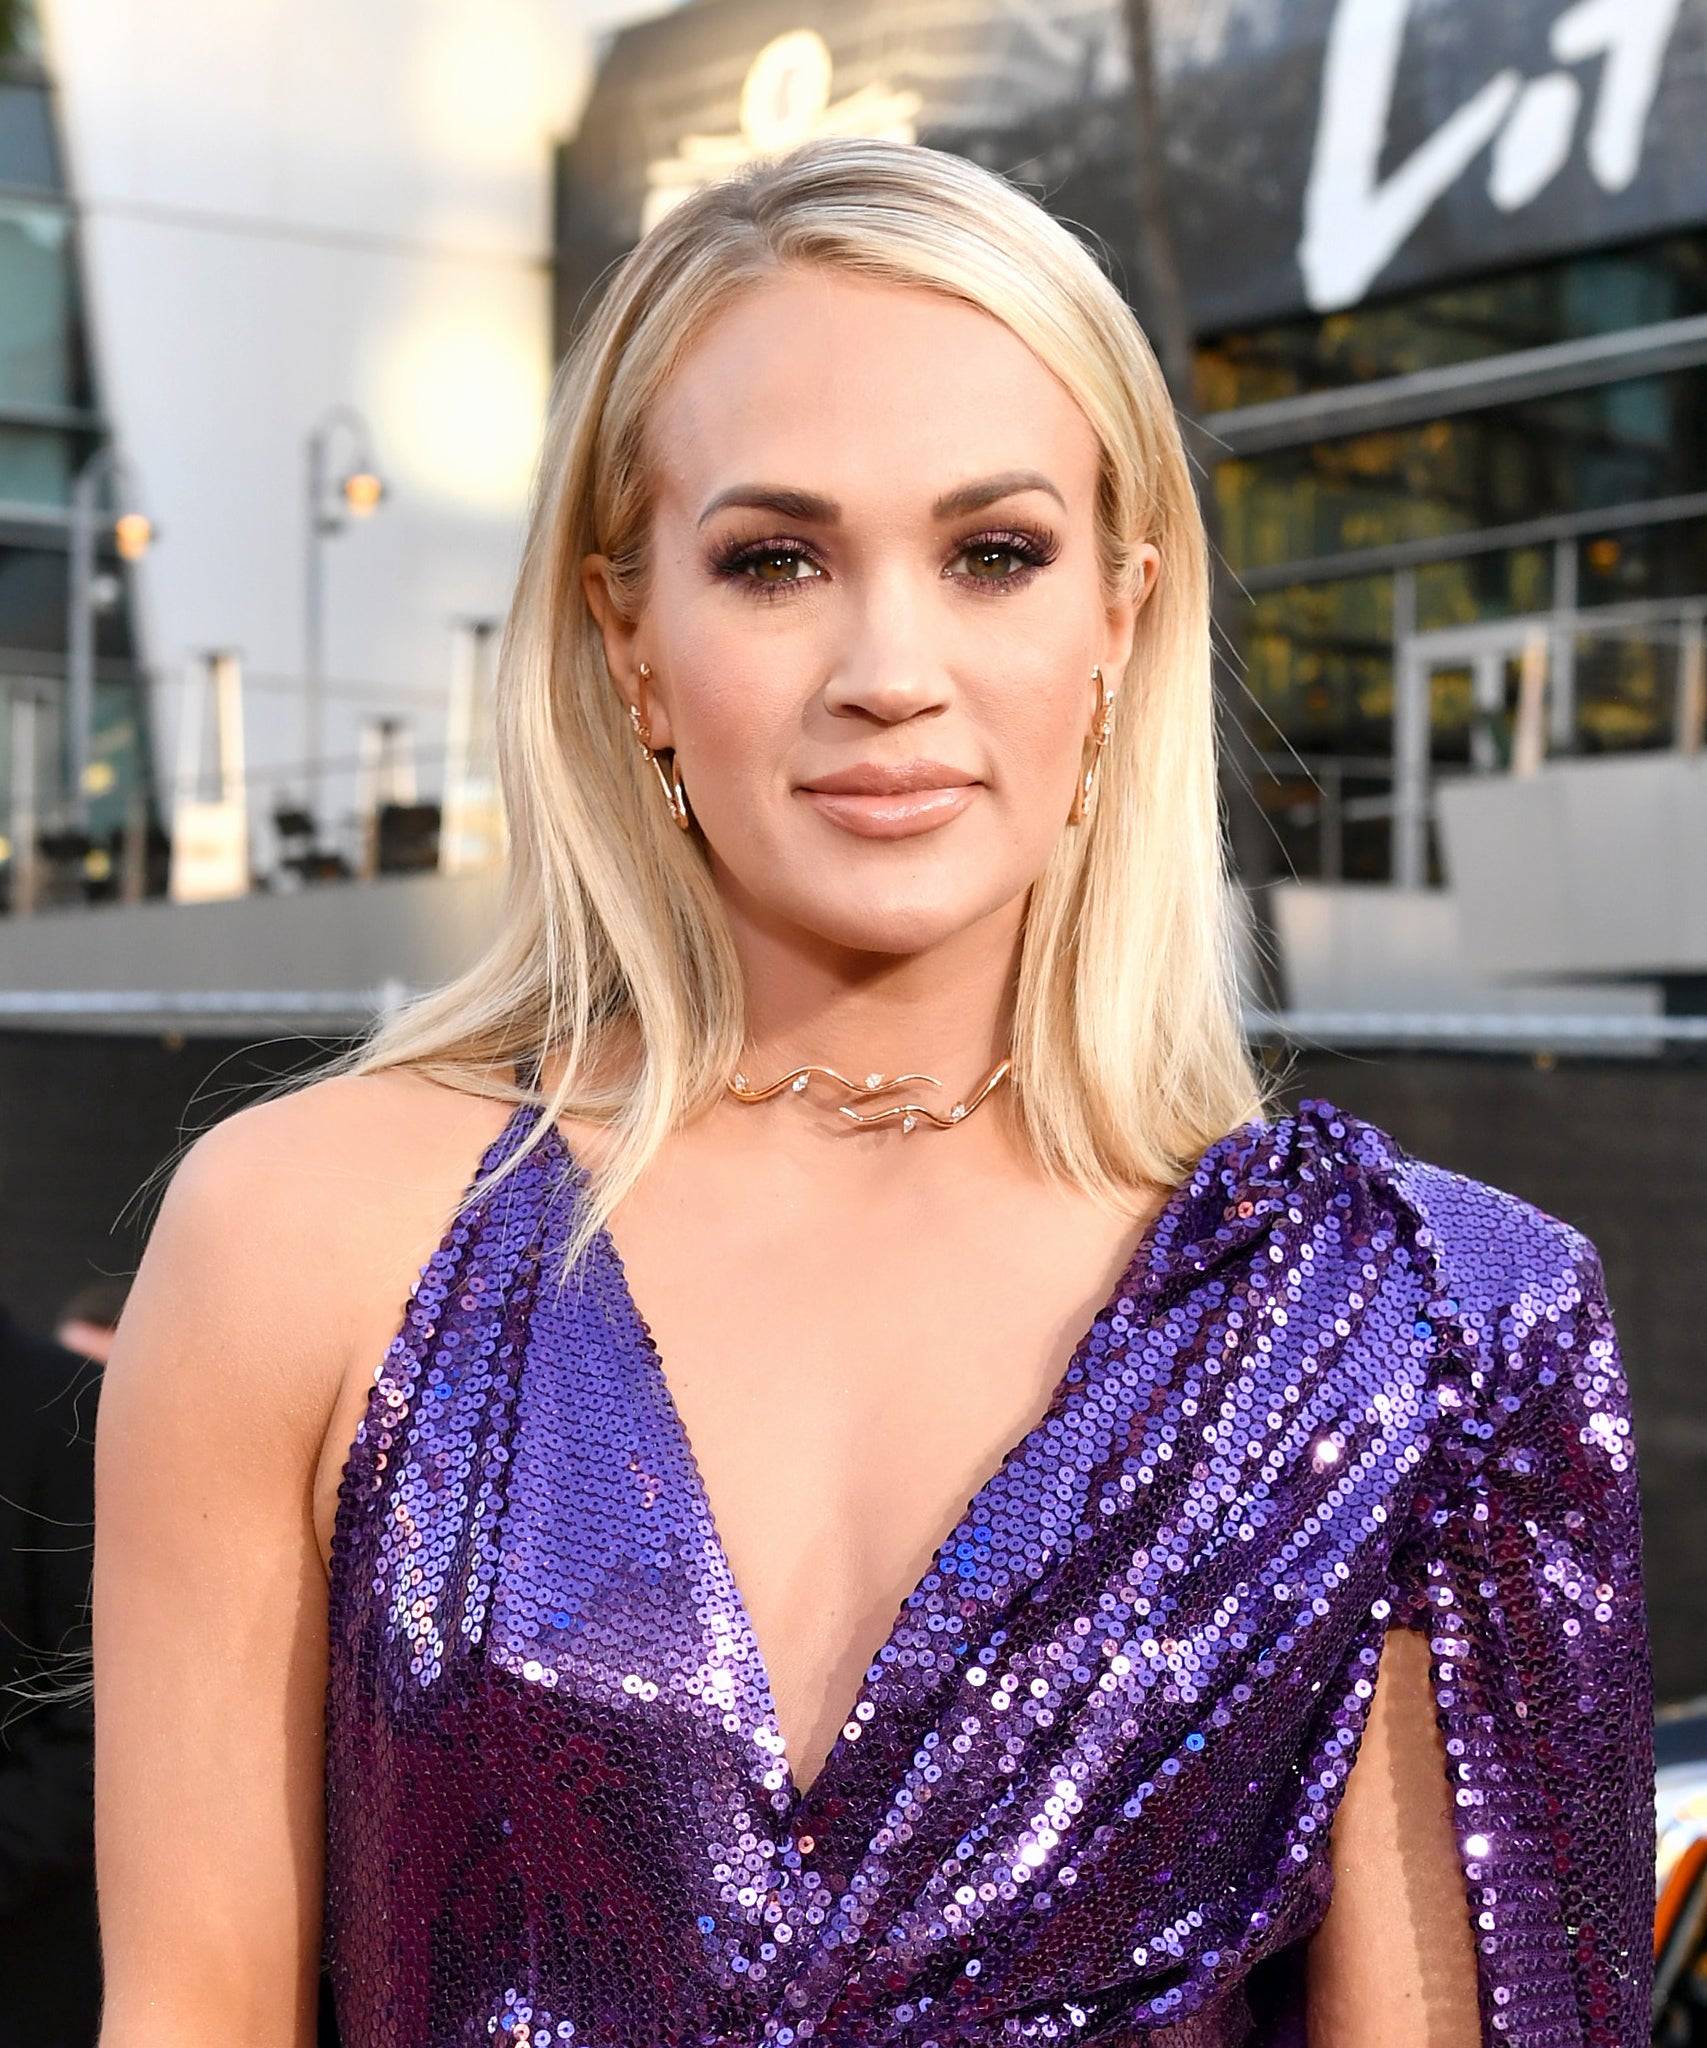 Carrie Underwood Archives - Celebrity Style Guide